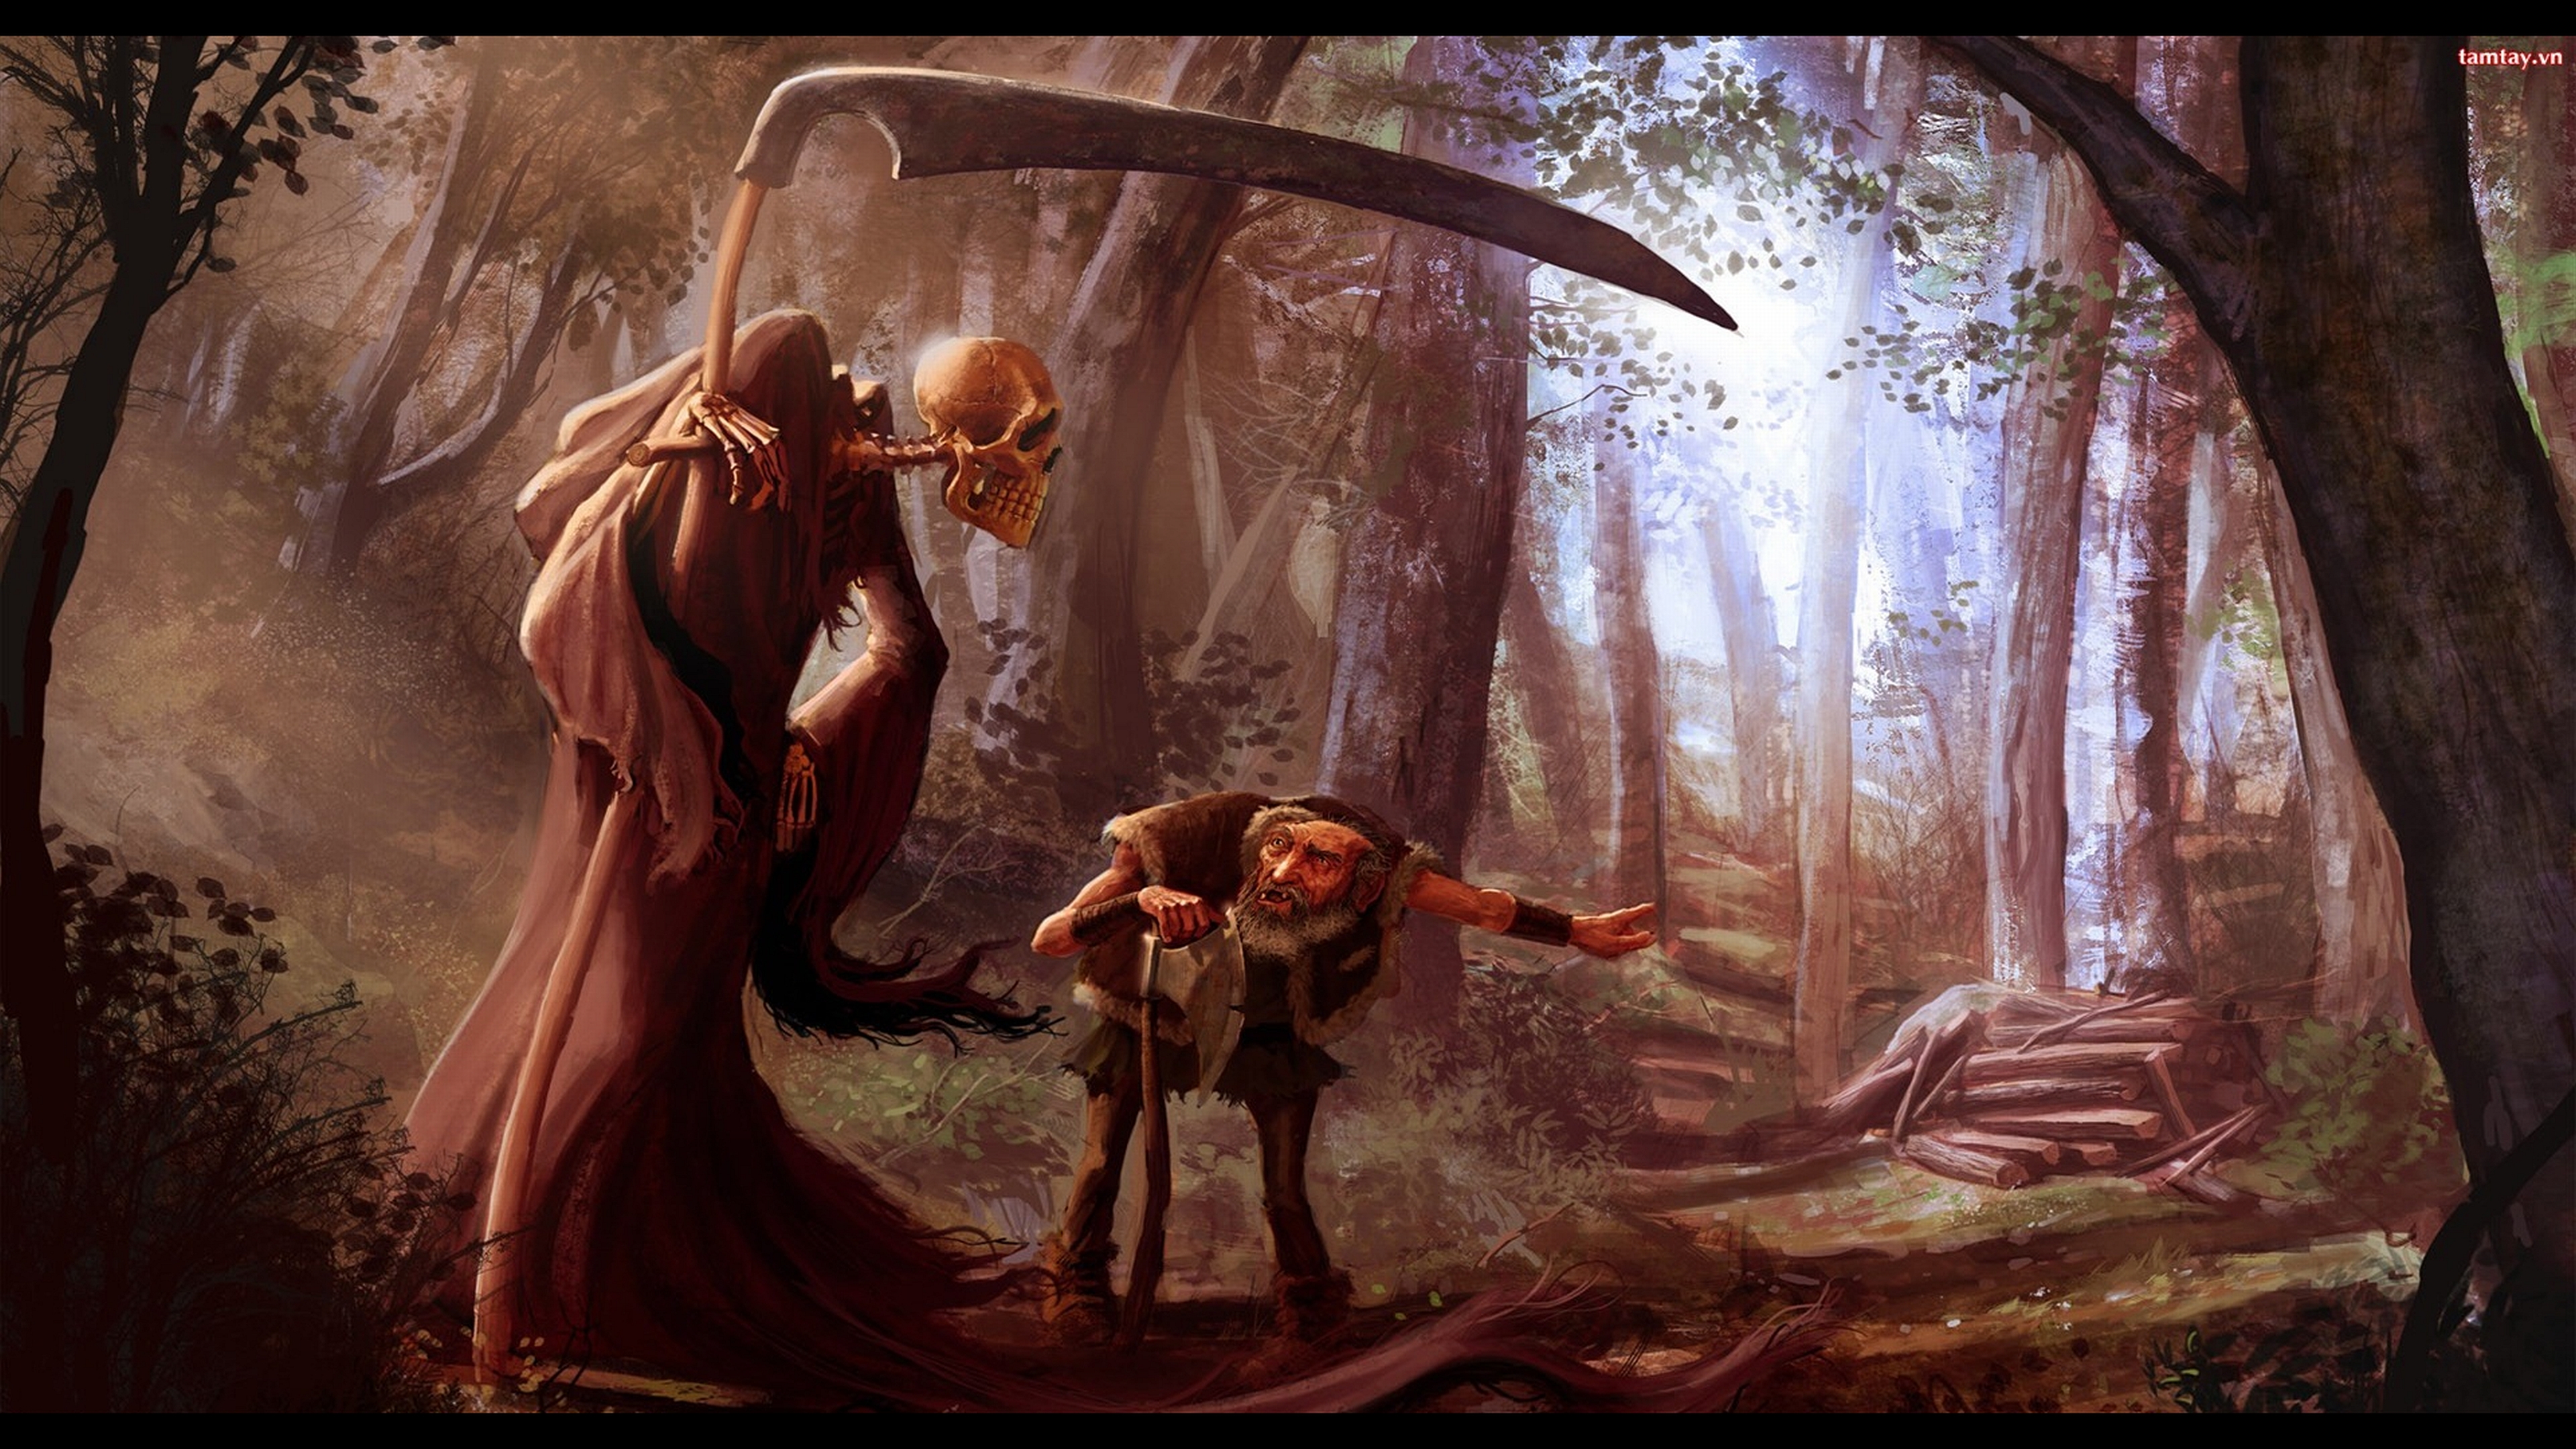 Dark and foreboding piece of art featuring a Grim Reaper with a wicked scythe.